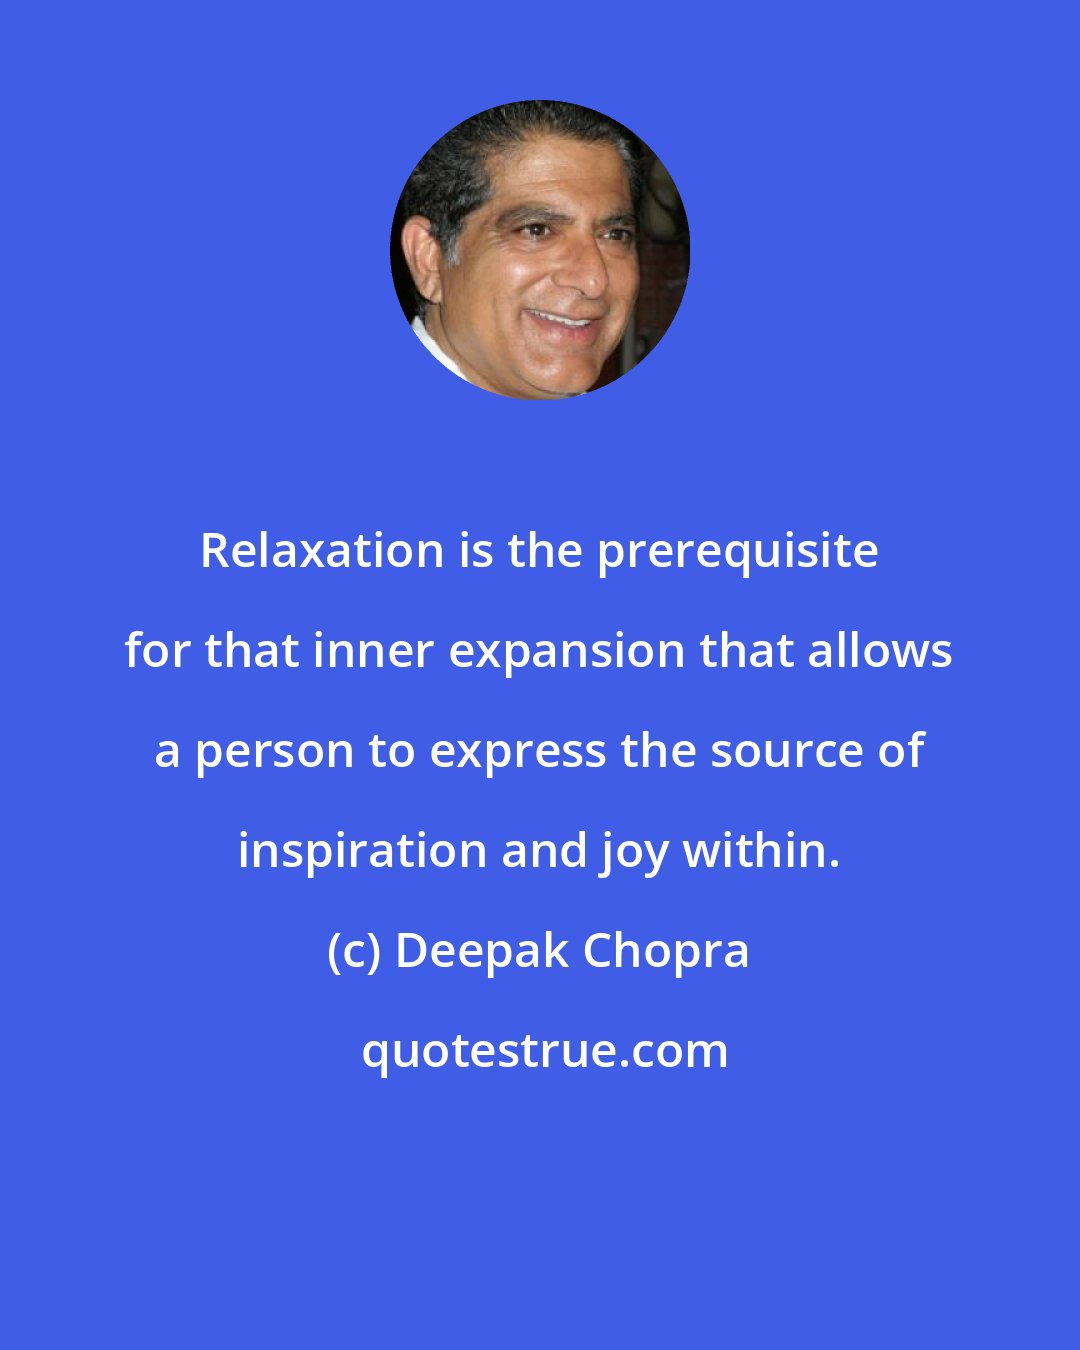 Deepak Chopra: Relaxation is the prerequisite for that inner expansion that allows a person to express the source of inspiration and joy within.